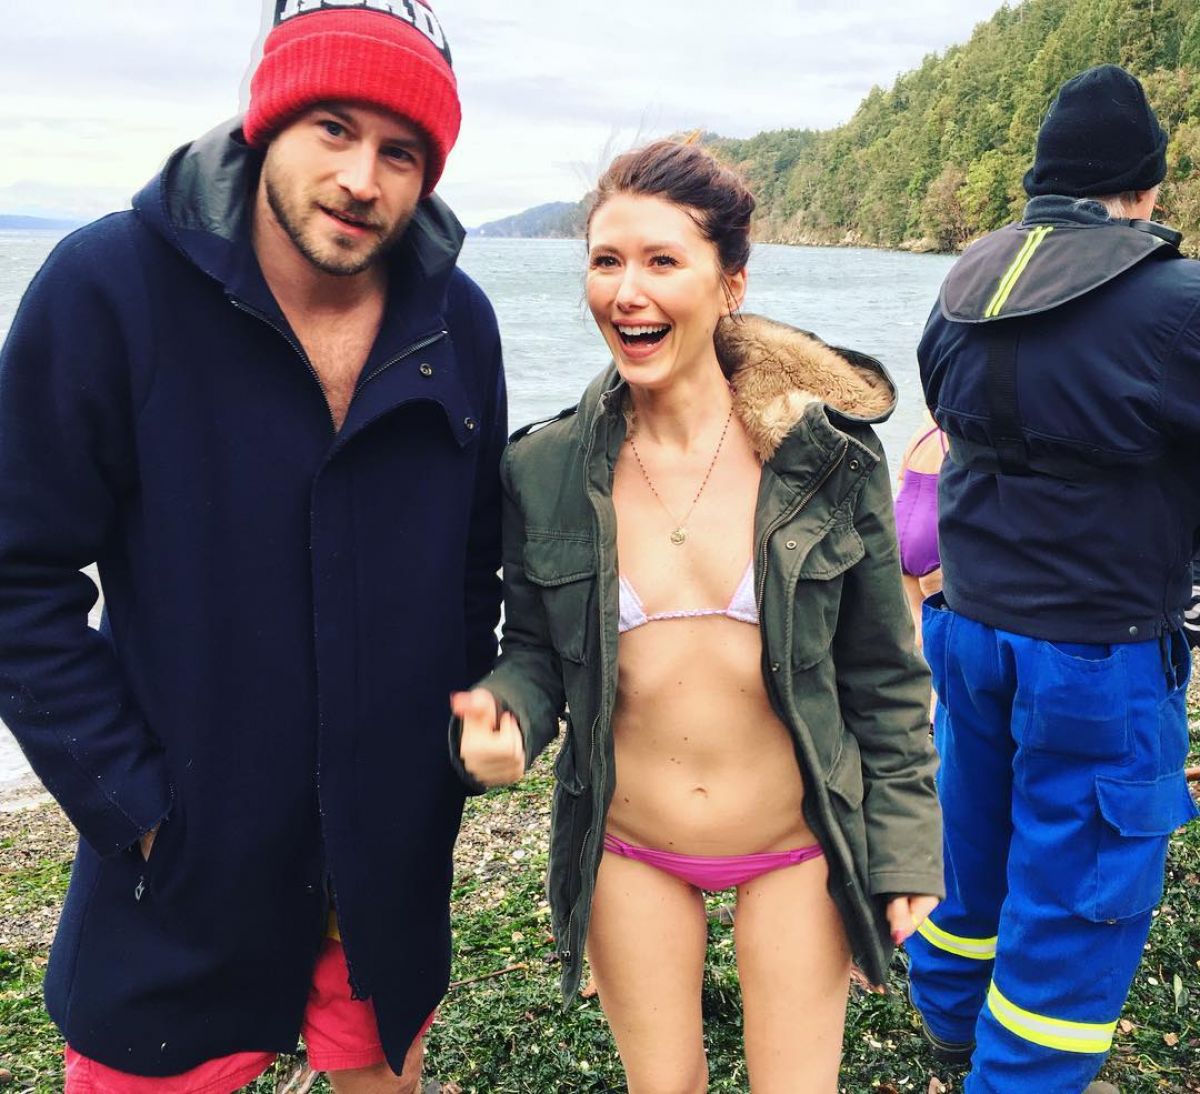 JEWEL STAITE at New Year’s Swim, Instagram Picture 01/01/2017. 